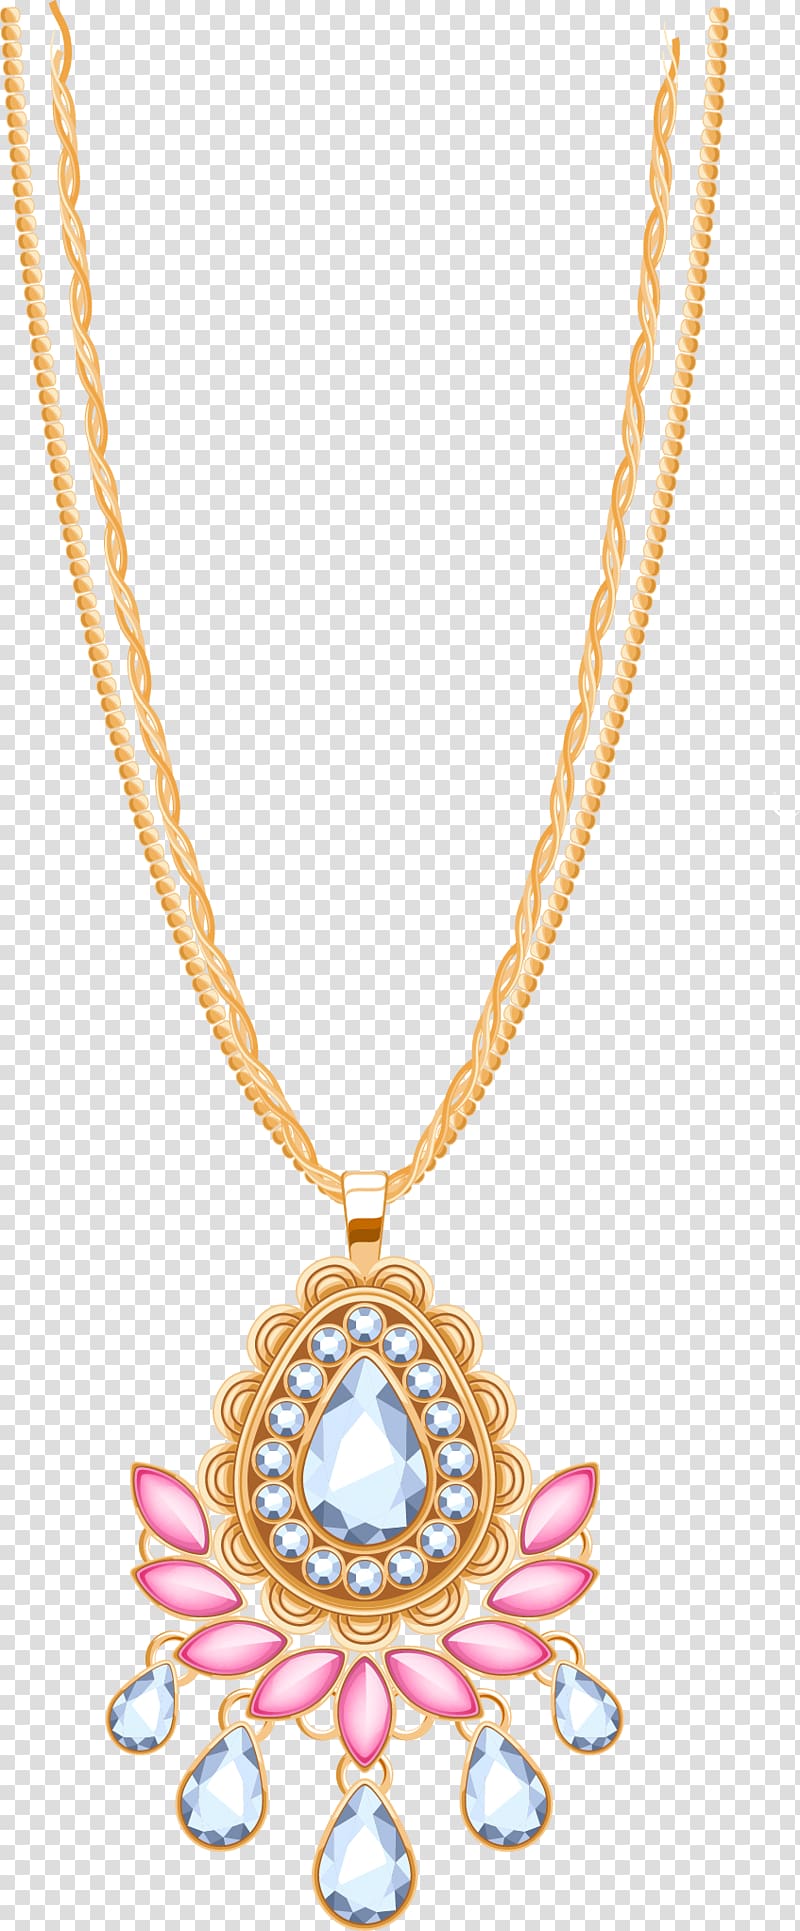 gold-colored pink gemstone pendant necklace illustration, Necklace Jewellery Pendant Chain Gemstone, Dazzling jewelry diamond jewelry transparent background PNG clipart